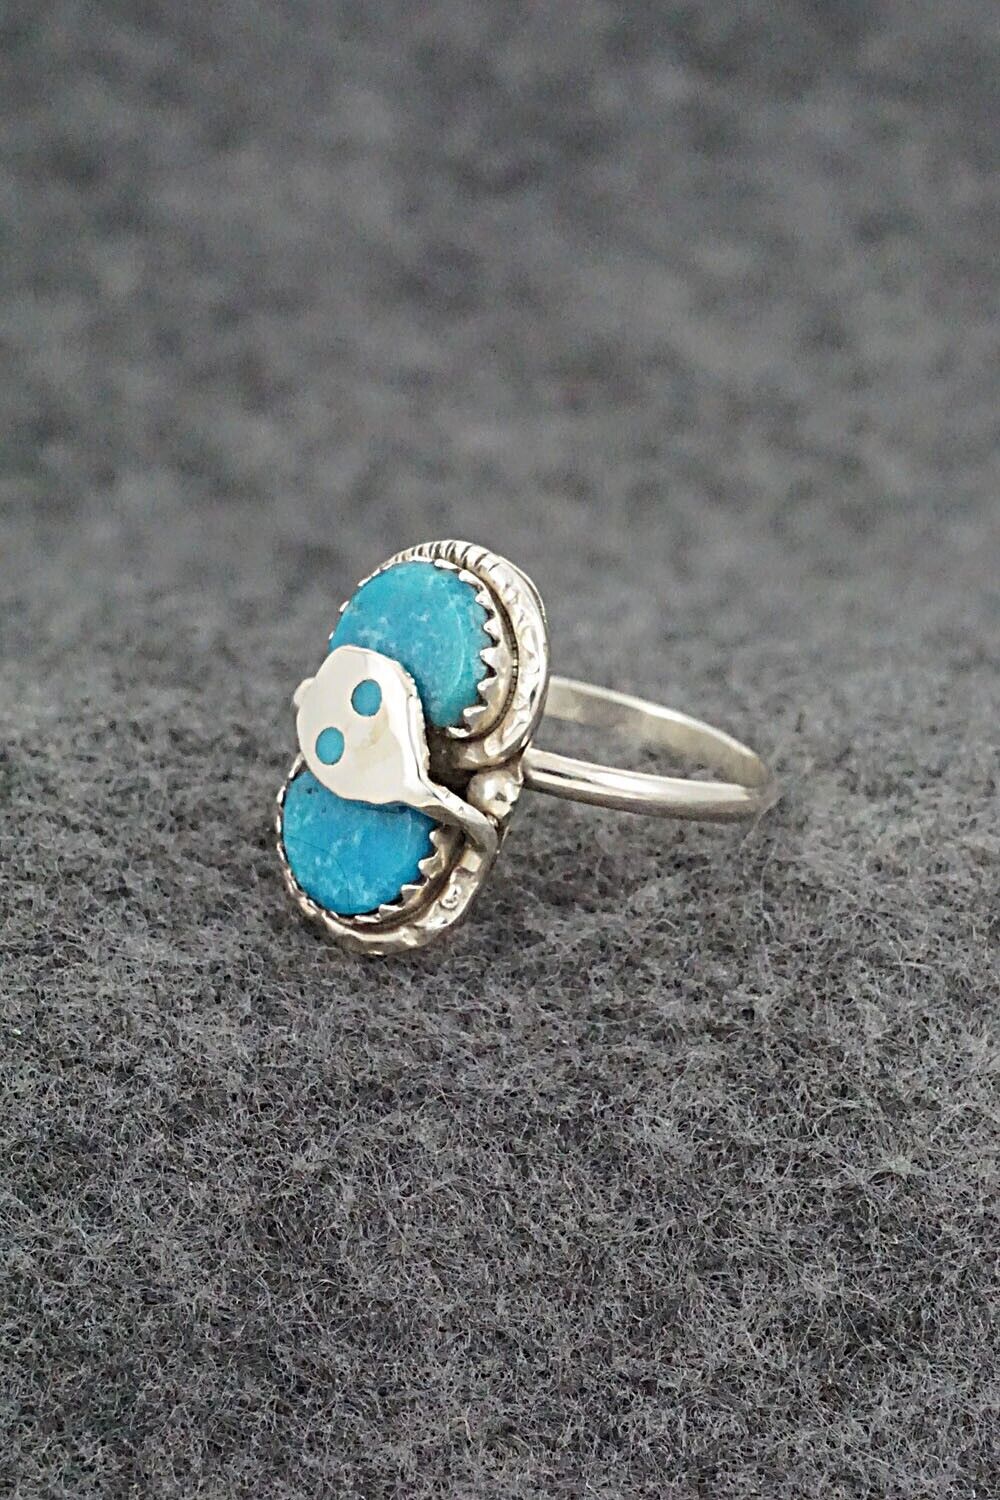 Turquoise & Sterling Silver Ring - Joy Calavaza - Size 7.25